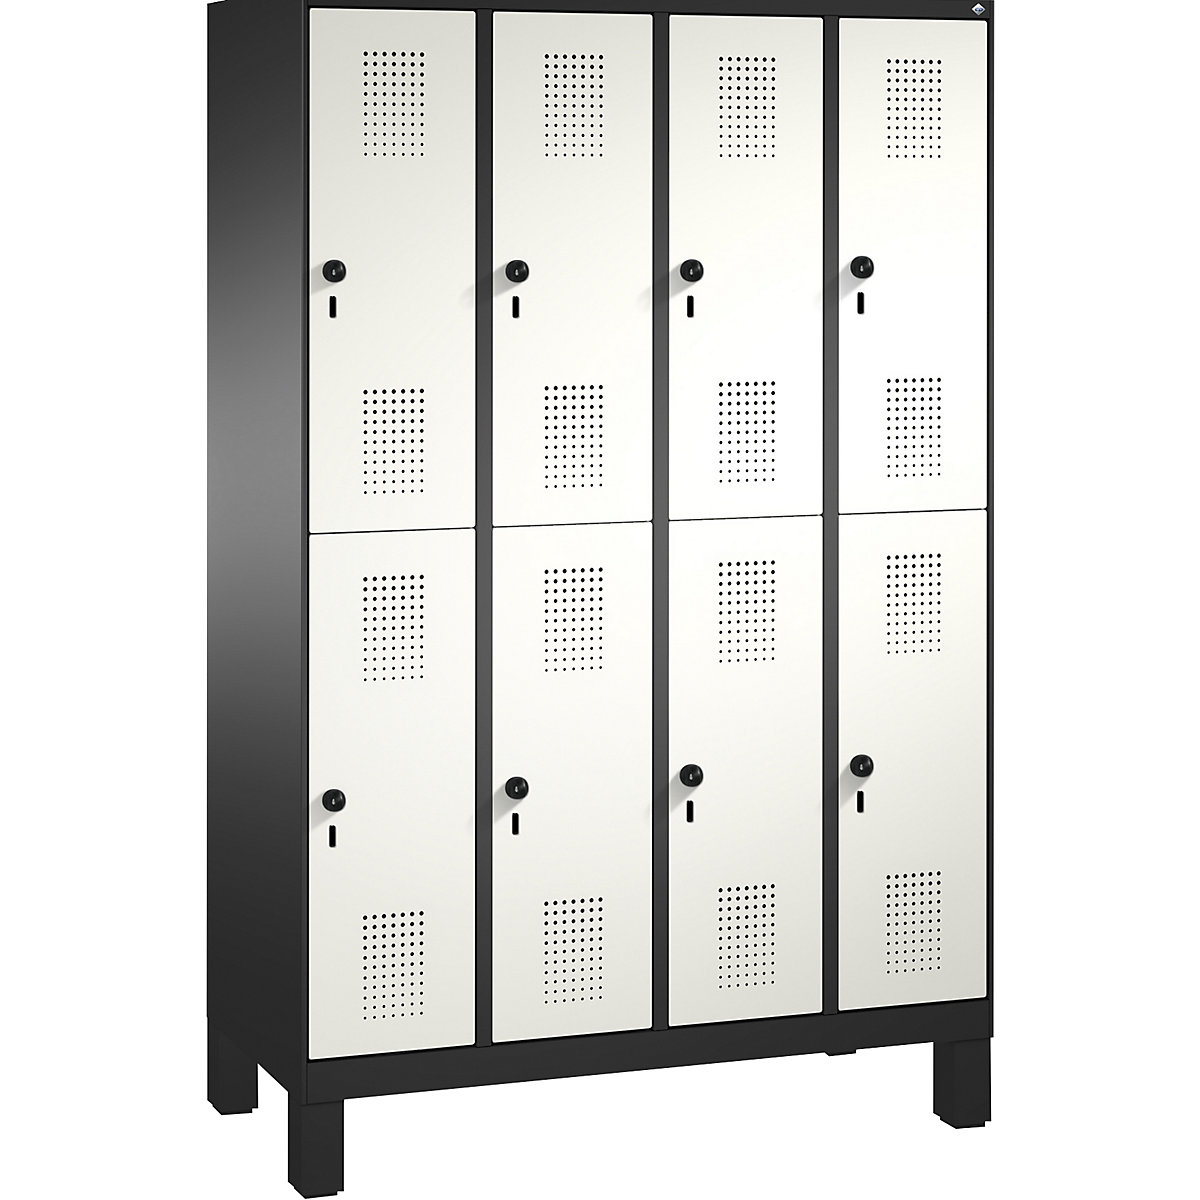 EVOLO cloakroom locker, double tier, with feet – C+P, 4 compartments, 2 shelf compartments each, compartment width 300 mm, black grey / traffic white-12